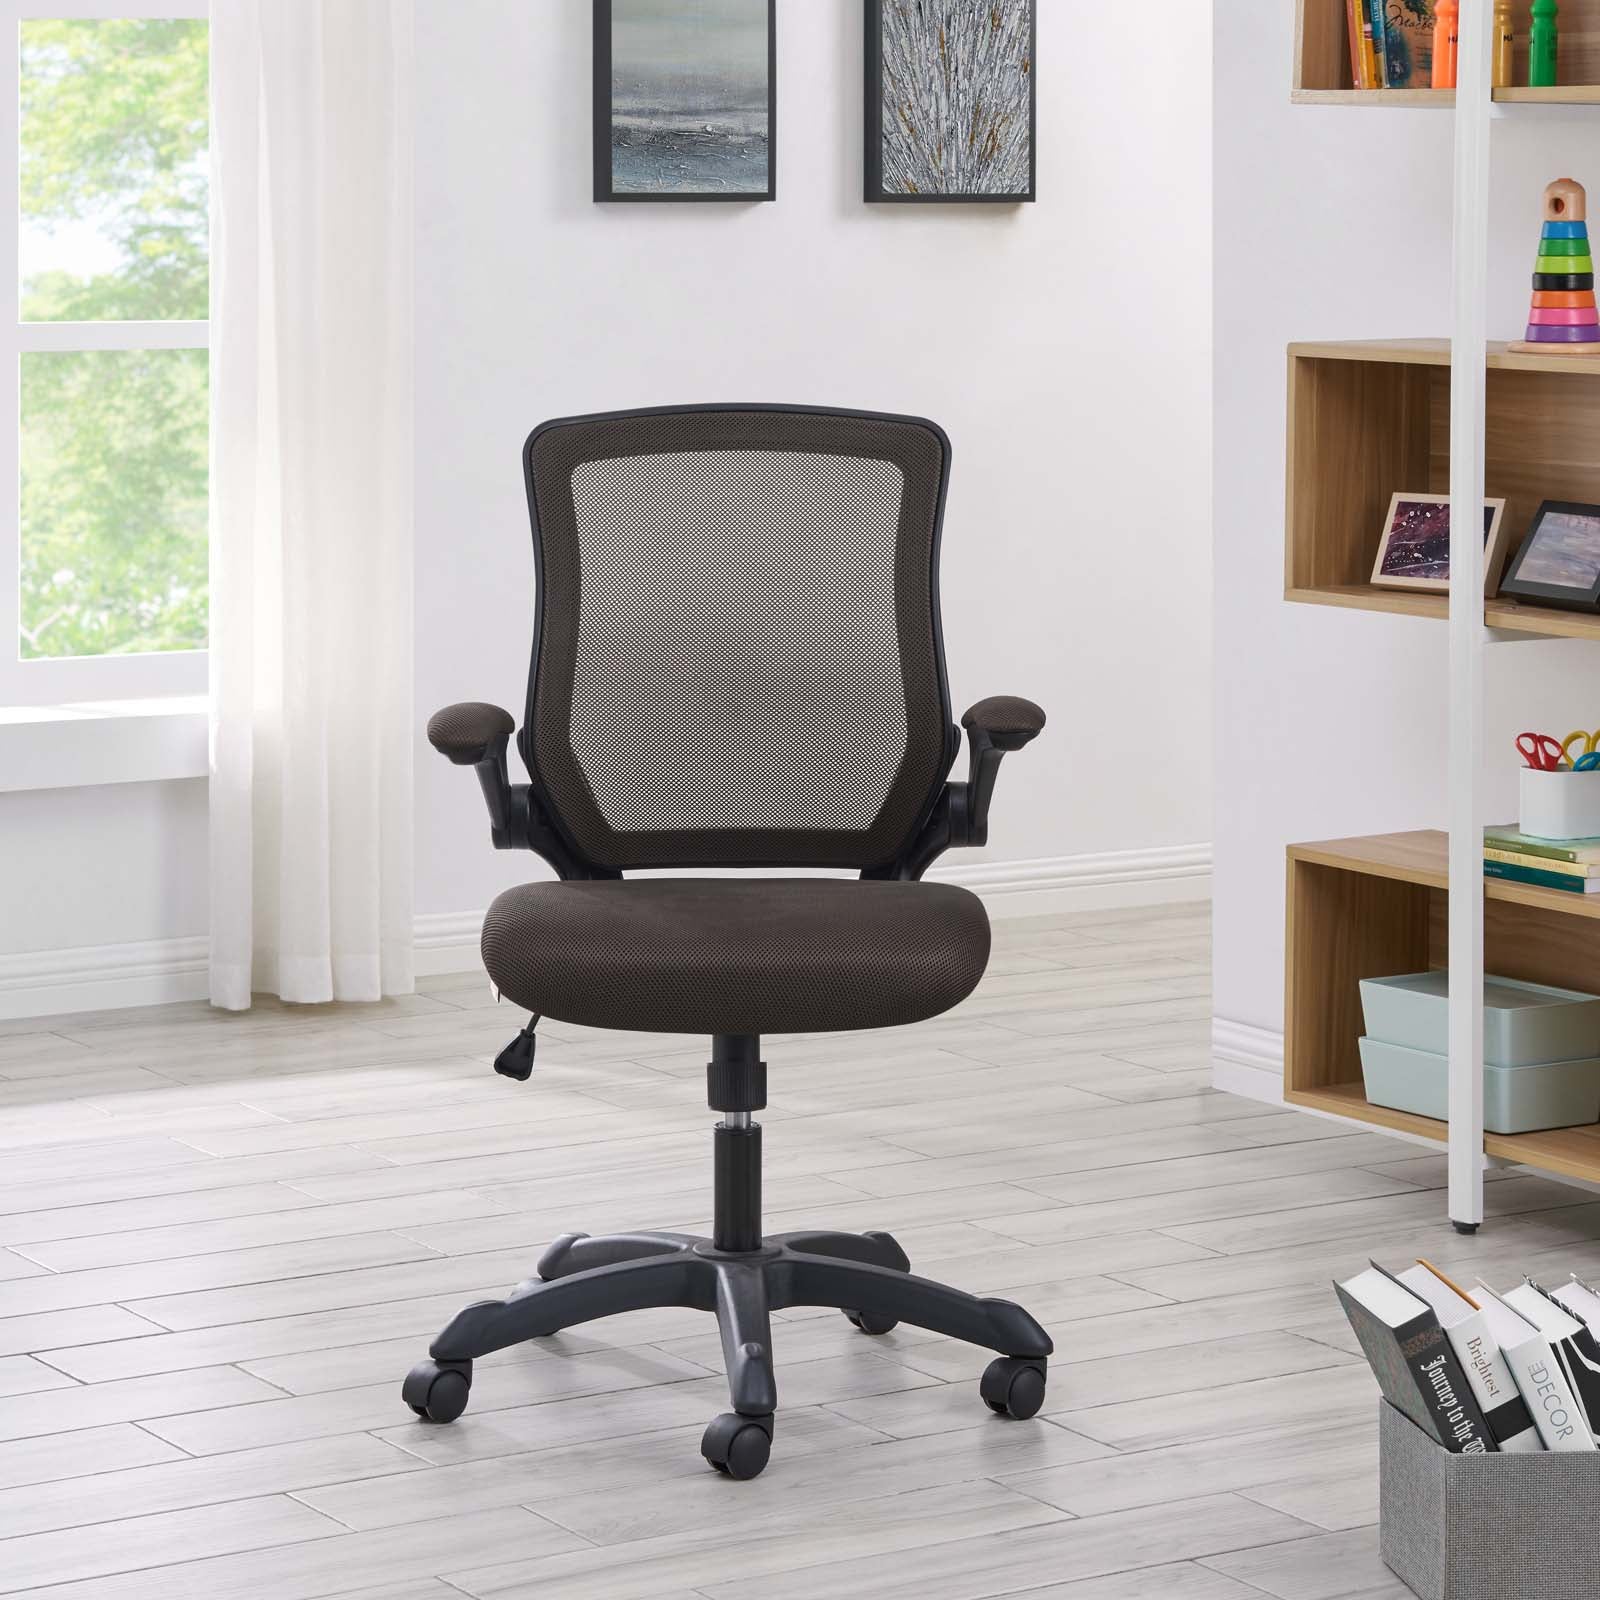 Modway Task Chairs - Veer Mesh Office Chair Brown